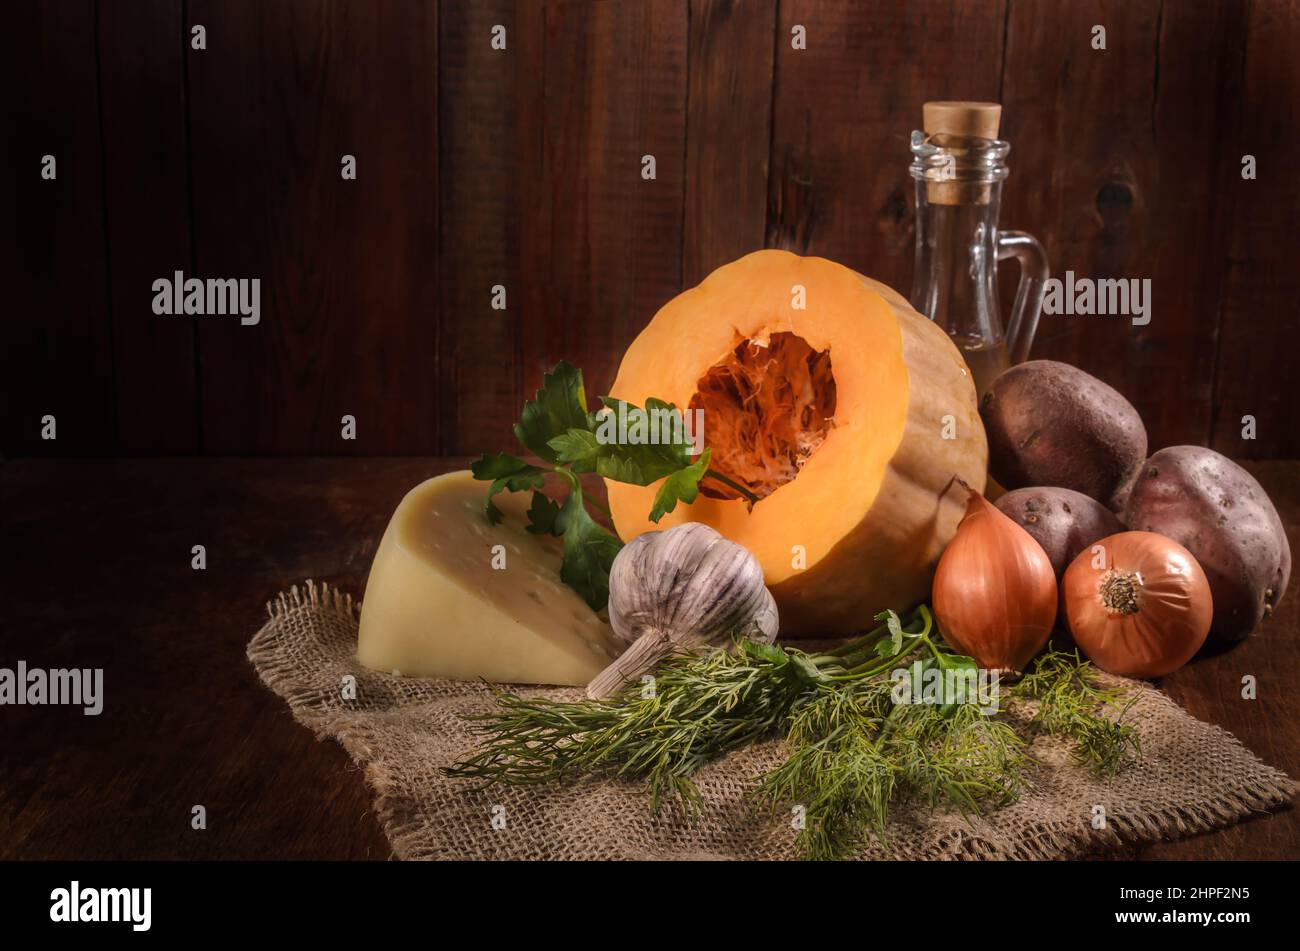 pumpkin and ingredients for pumpkin casserole with potatoes and cheese on a dark background Stock Photo